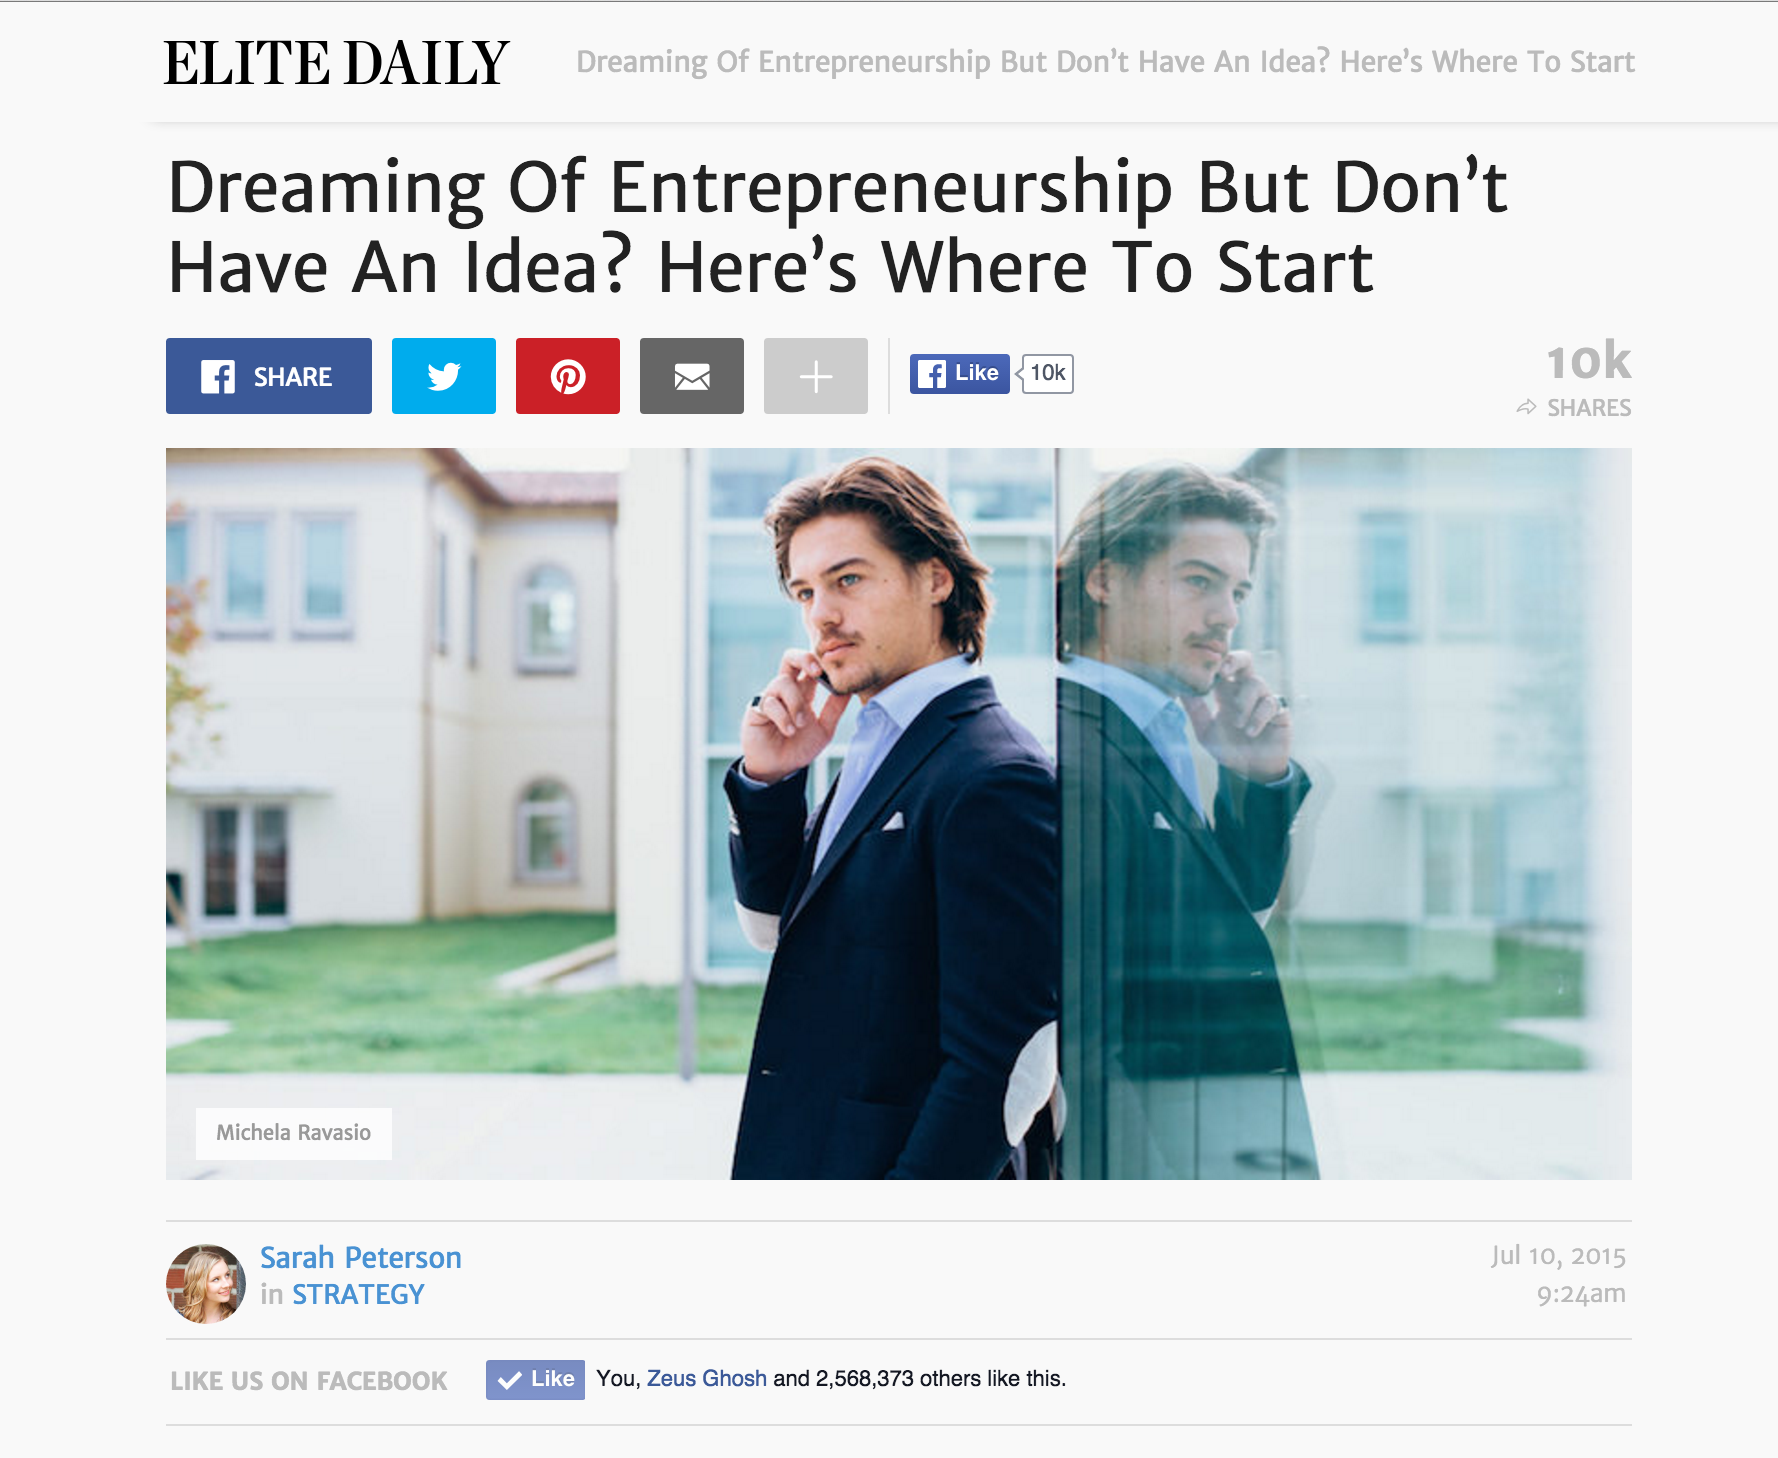 Screenshot of a content piece on Elite Daily